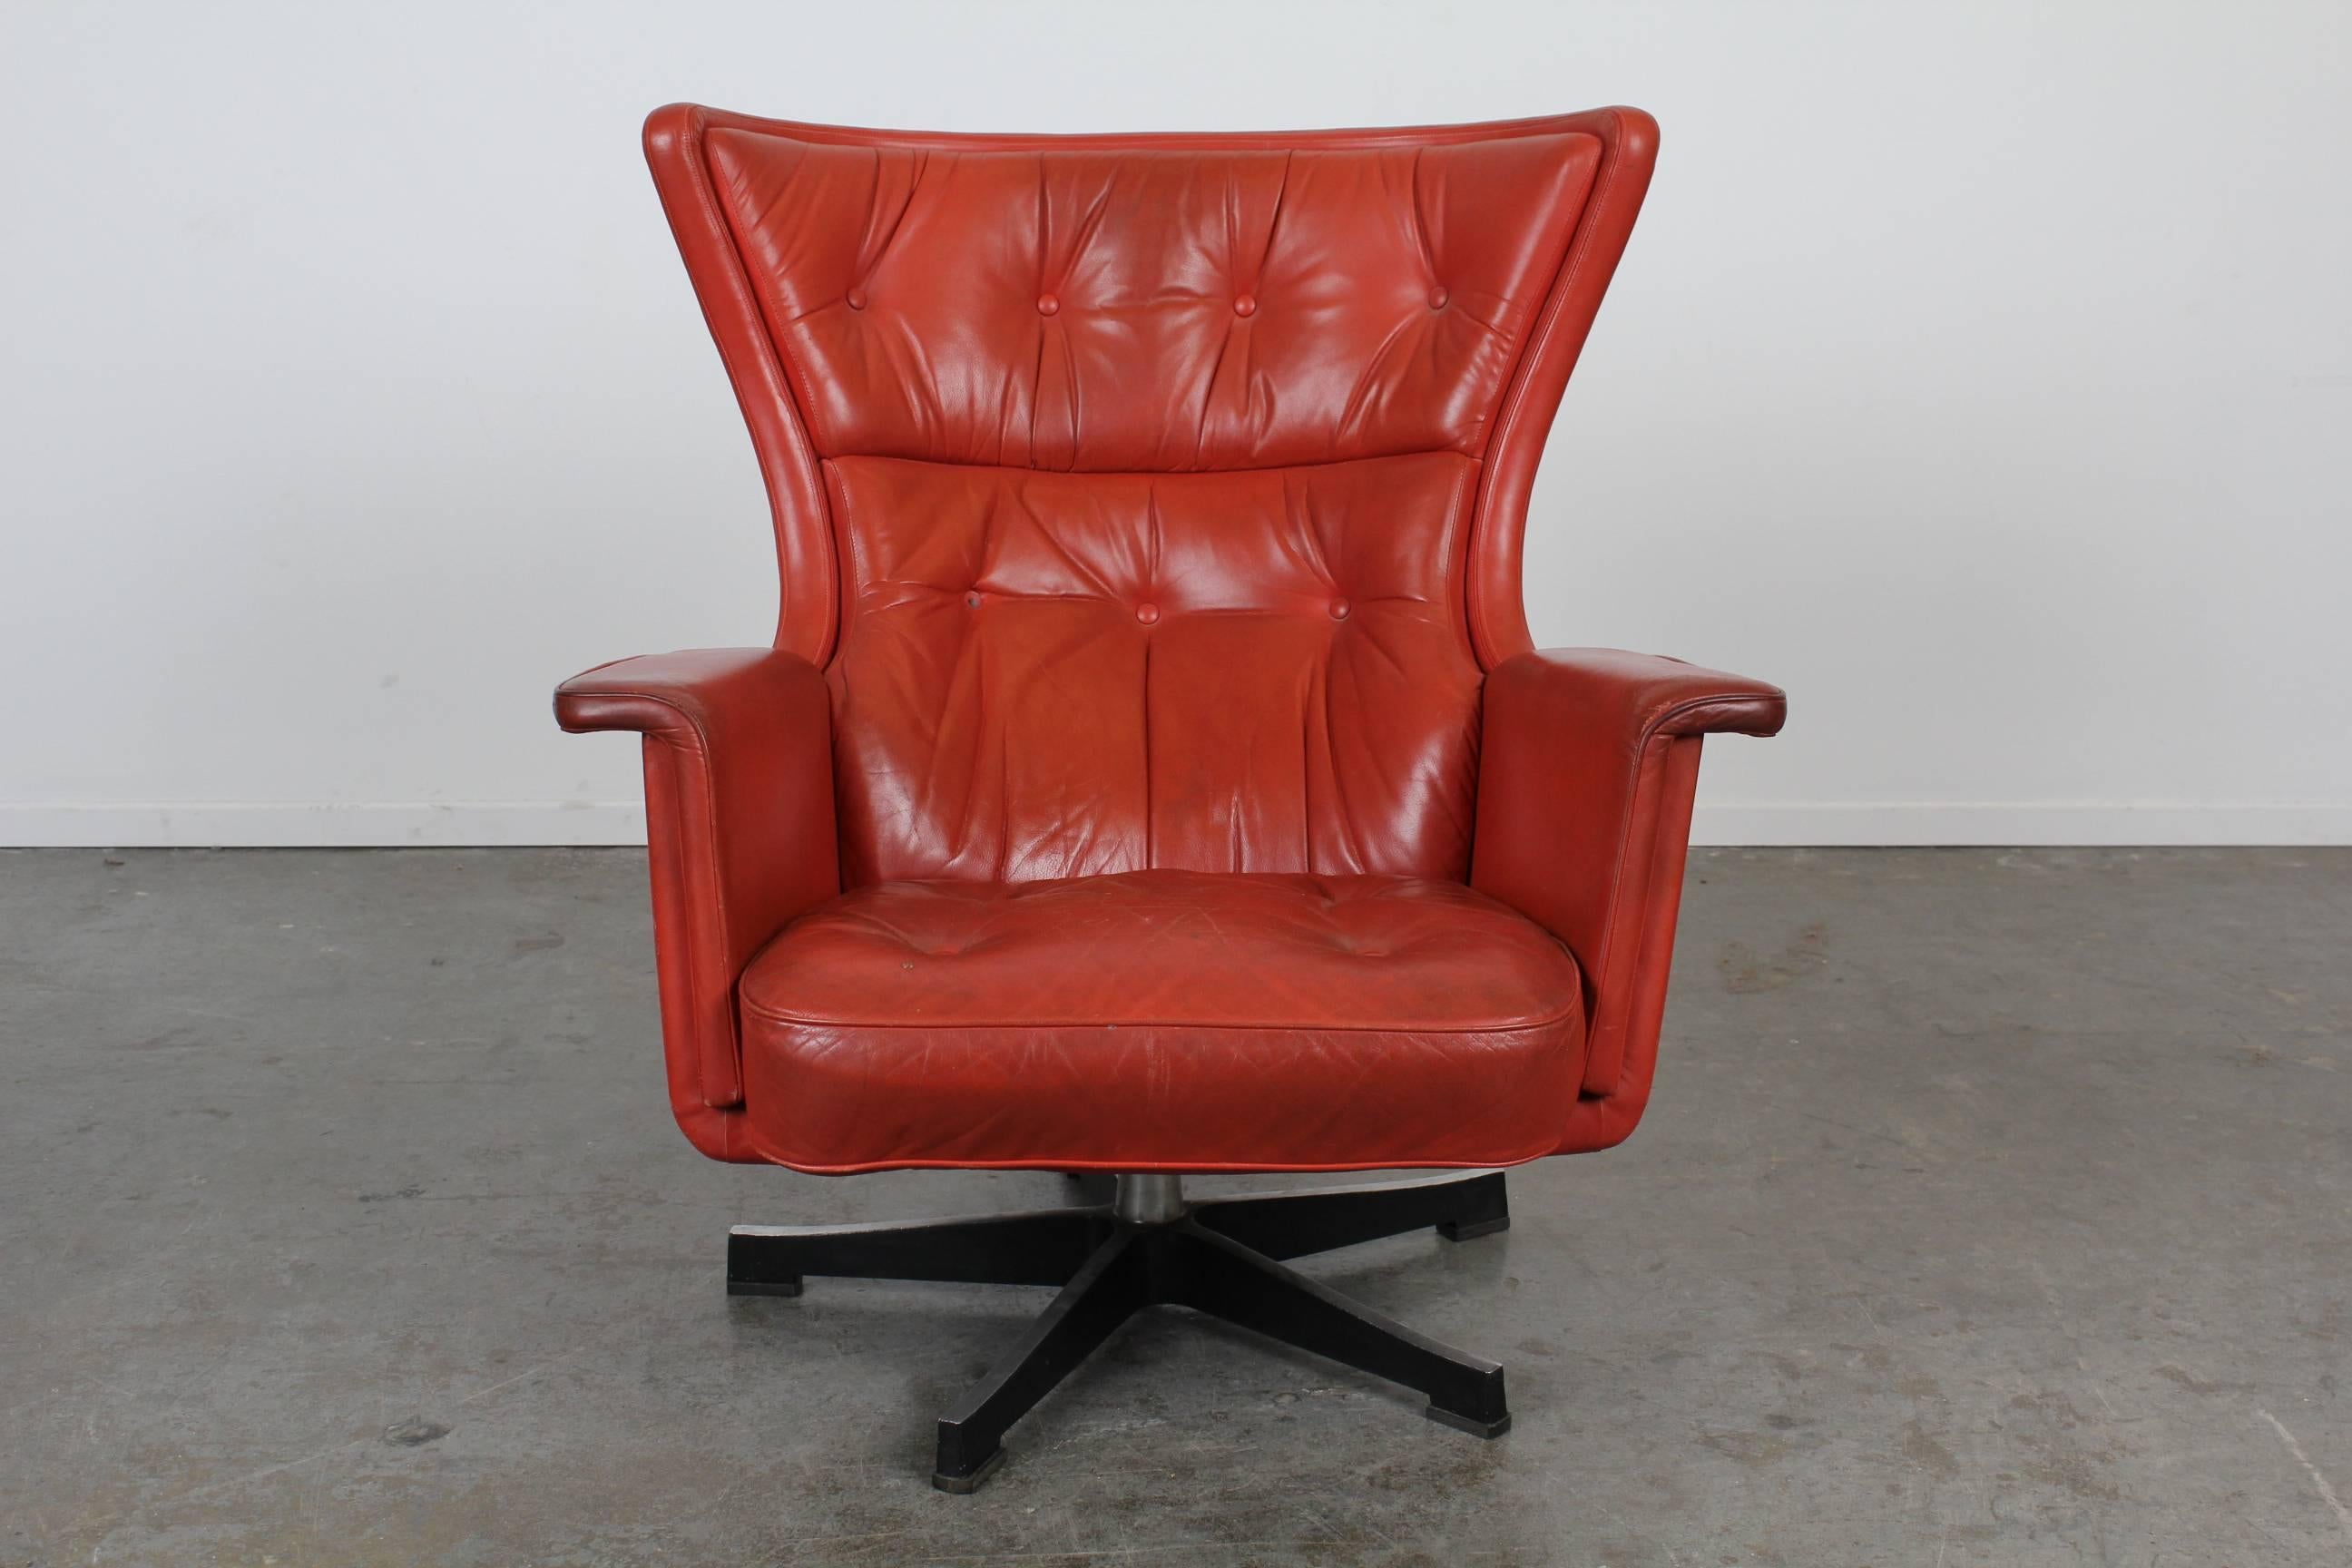 Vintage red leather swivel lounge chair with ottoman, designed by Karl Erik Ekselius. Matching pair available.